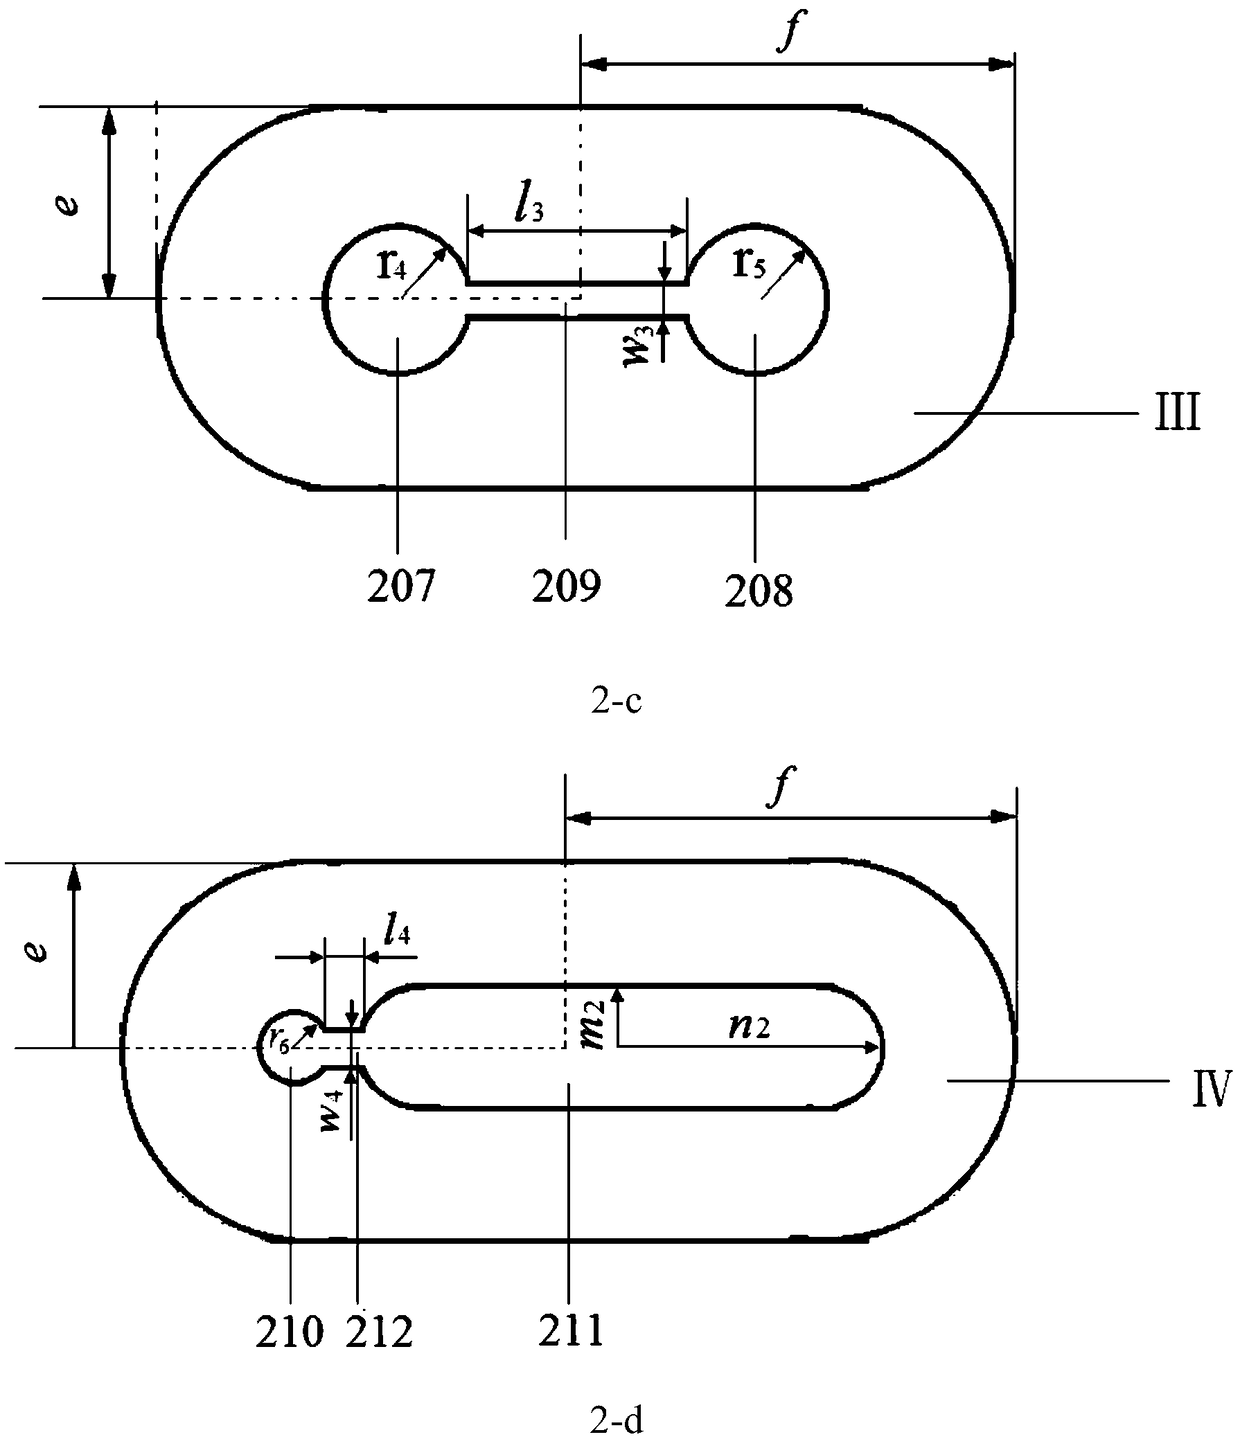 Superconducting magnet based on ReBCO superconducting rings